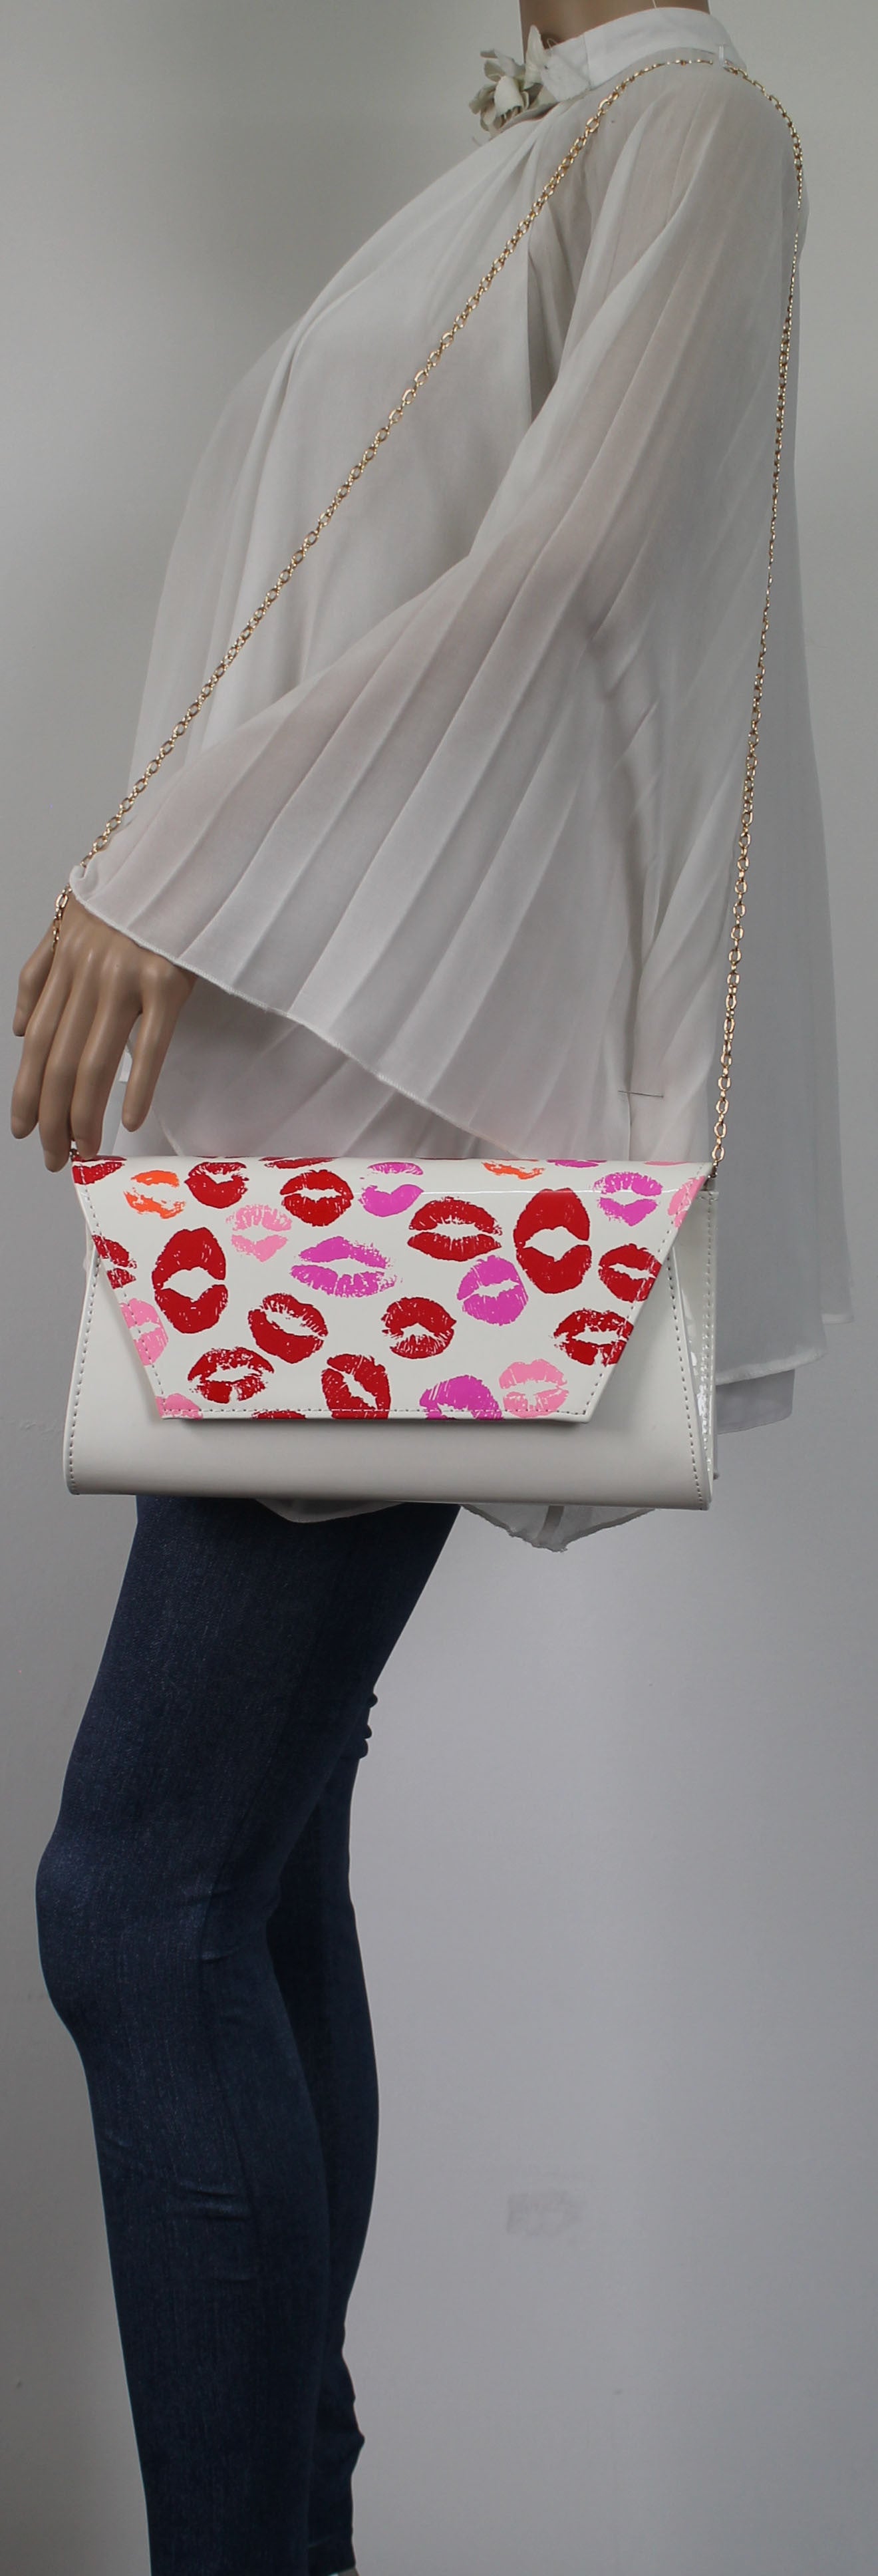 SWANKYSWANS Vicky Kiss Print Clutch Bag White Cute Cheap Clutch Bag For Weddings School and Work